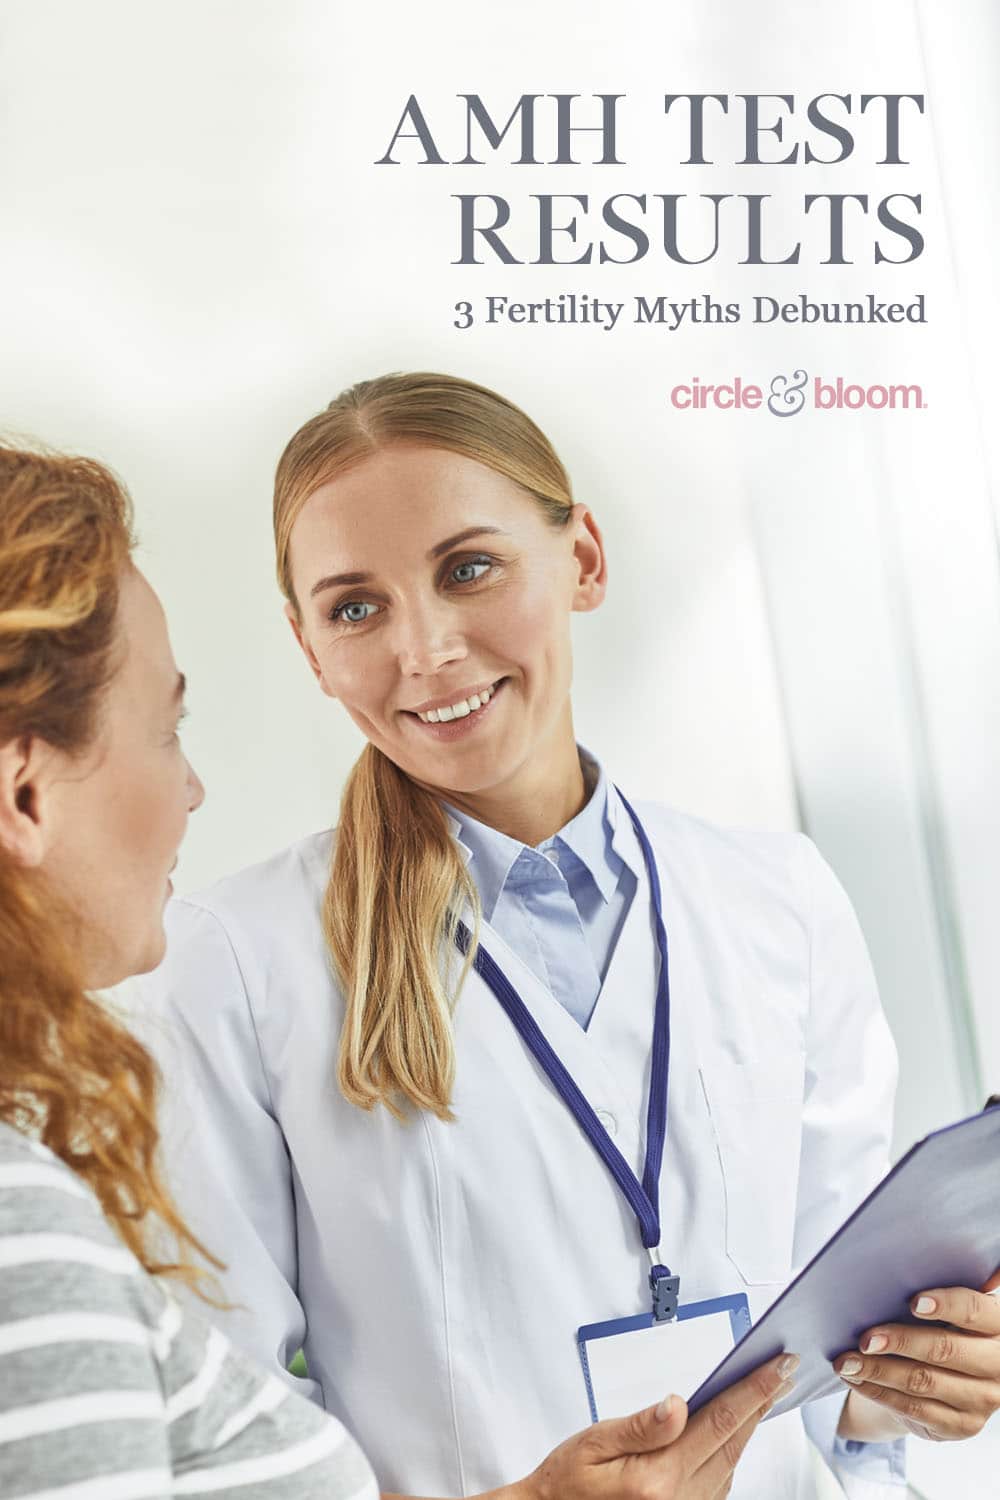 Don’t Let Your AMH Test Results Define You - Discover 3 Fertility Myths Debunked